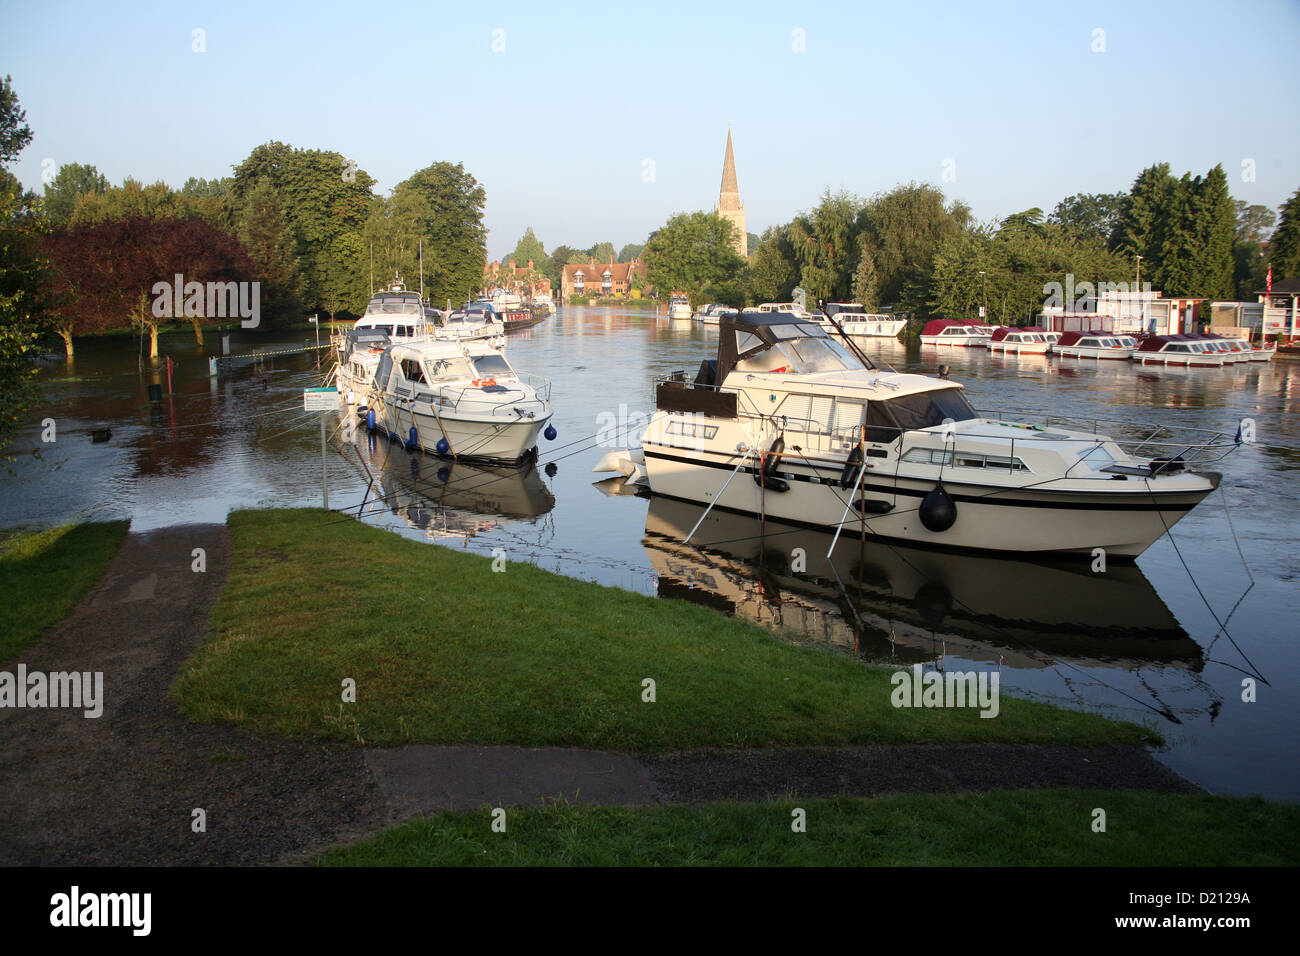 River Thames flooding Abingdon, Oxfordshire, England July 2007, stranded boats on flood foot path. Stock Photo